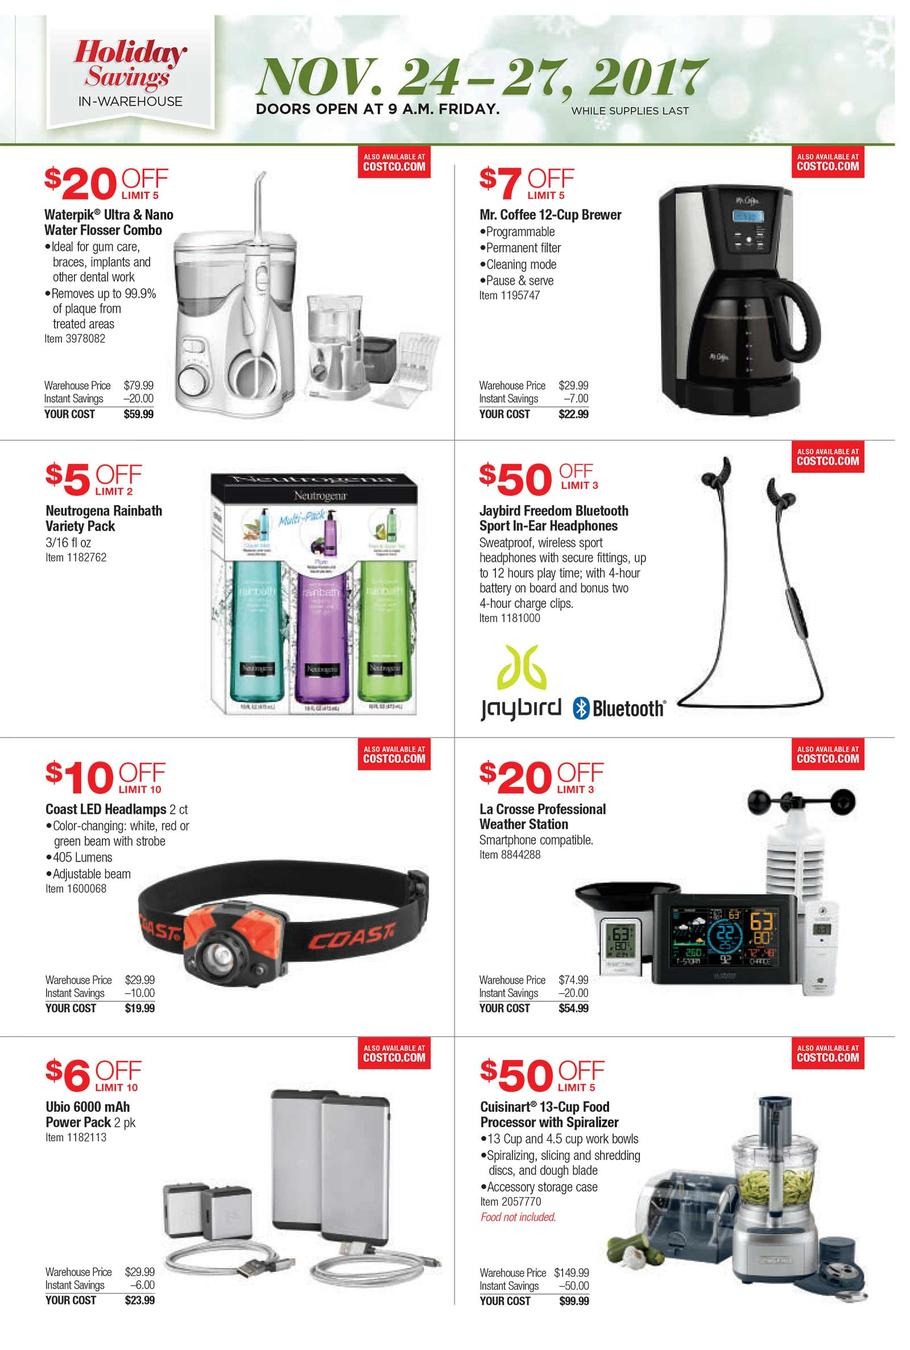 Costco Black Friday Ads, Sales, Doorbusters, and Deals 2017 – CouponShy